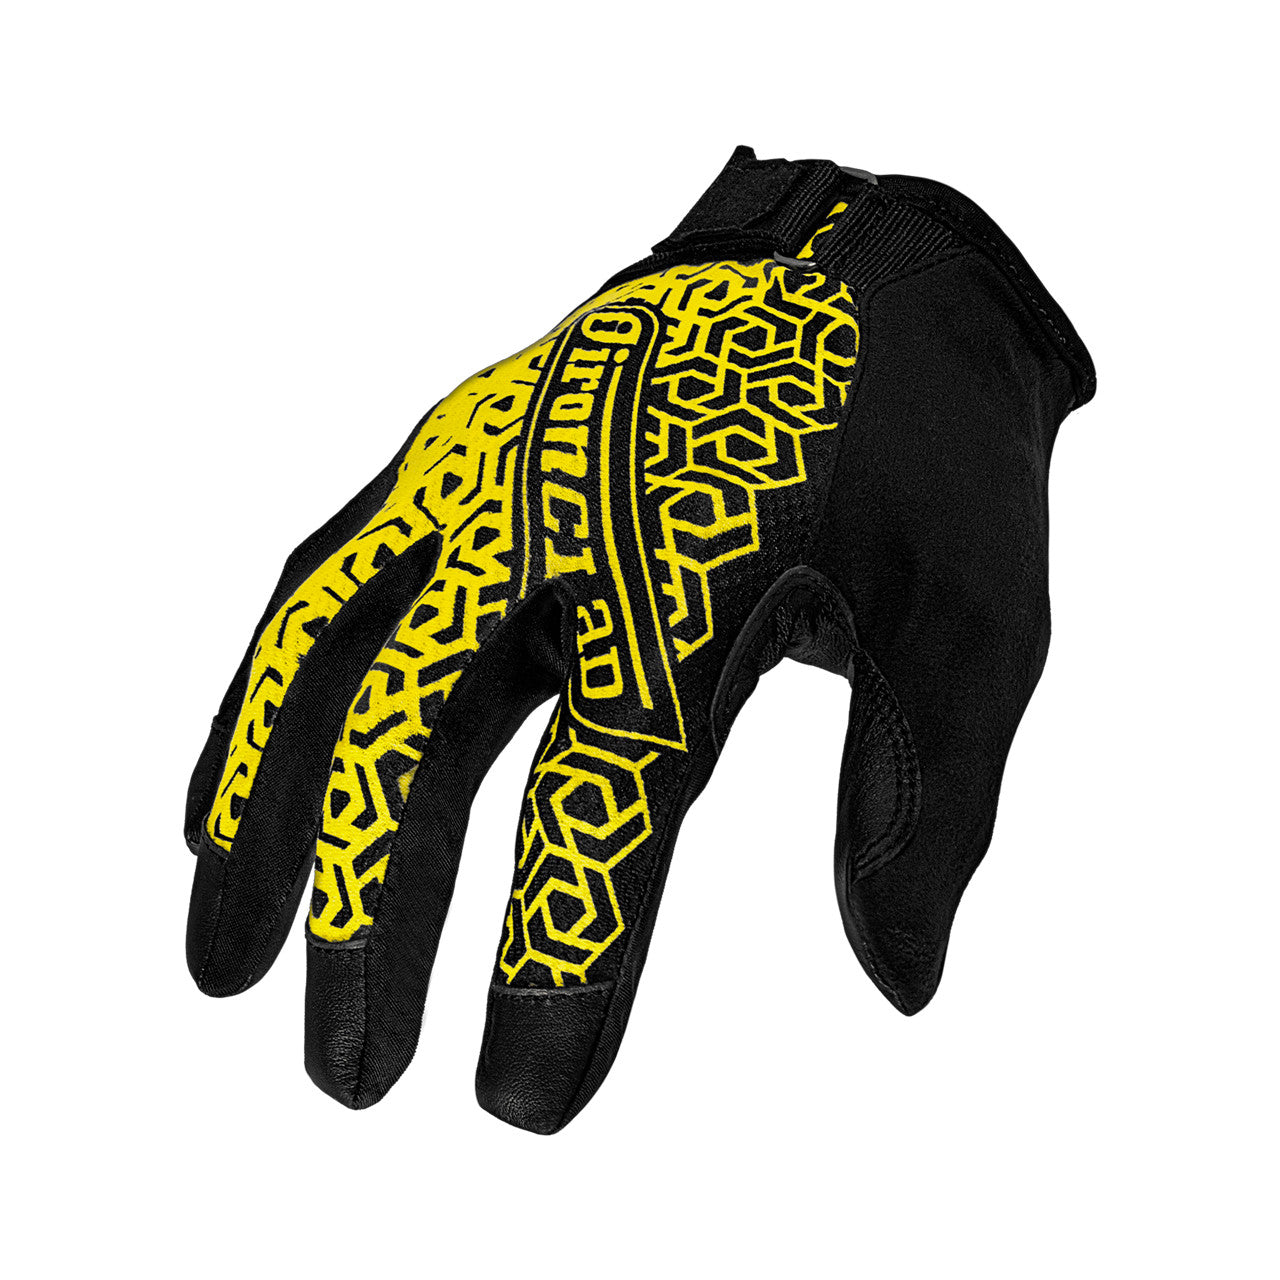 Ironclad IRONCLAD® console Glove Black/Yellow-eSafety Supplies, Inc